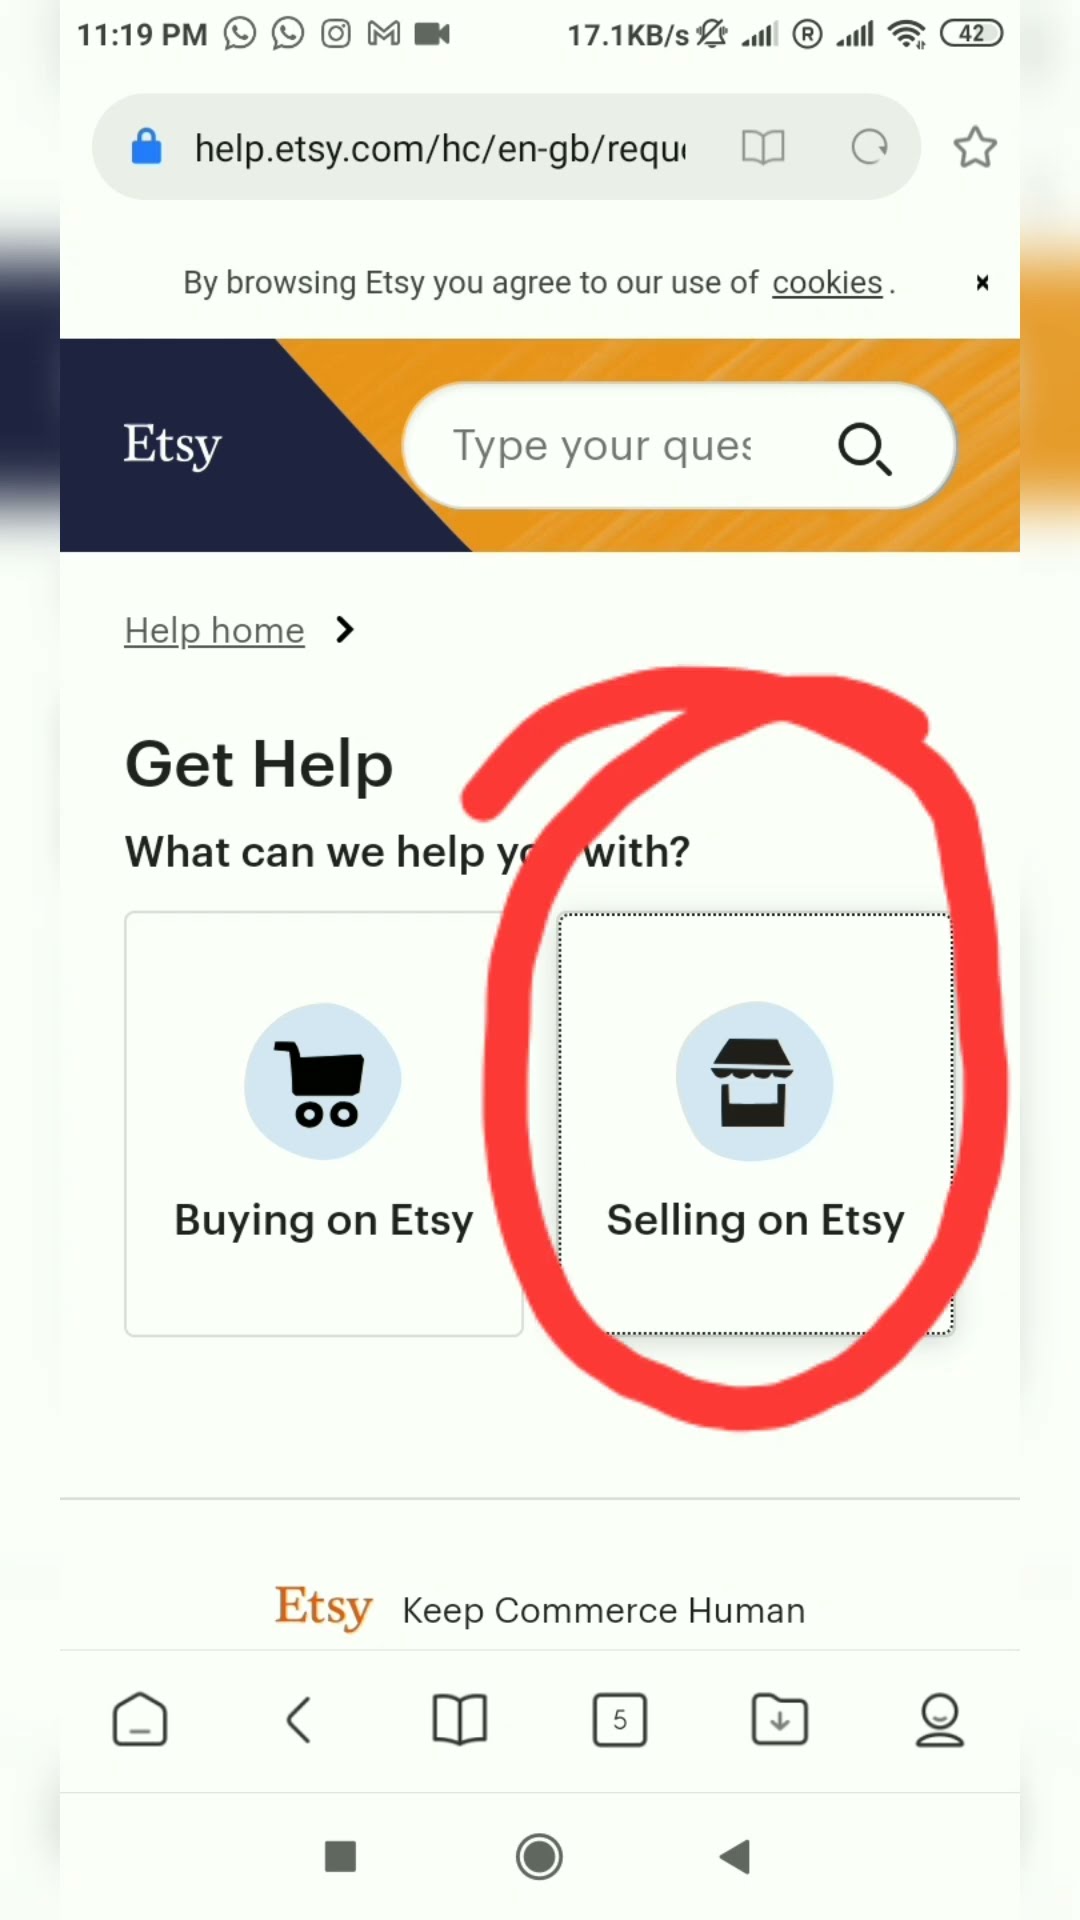 How to contact Etsy support #etsyintamil #onlinebusinesstamil #sellonetsy